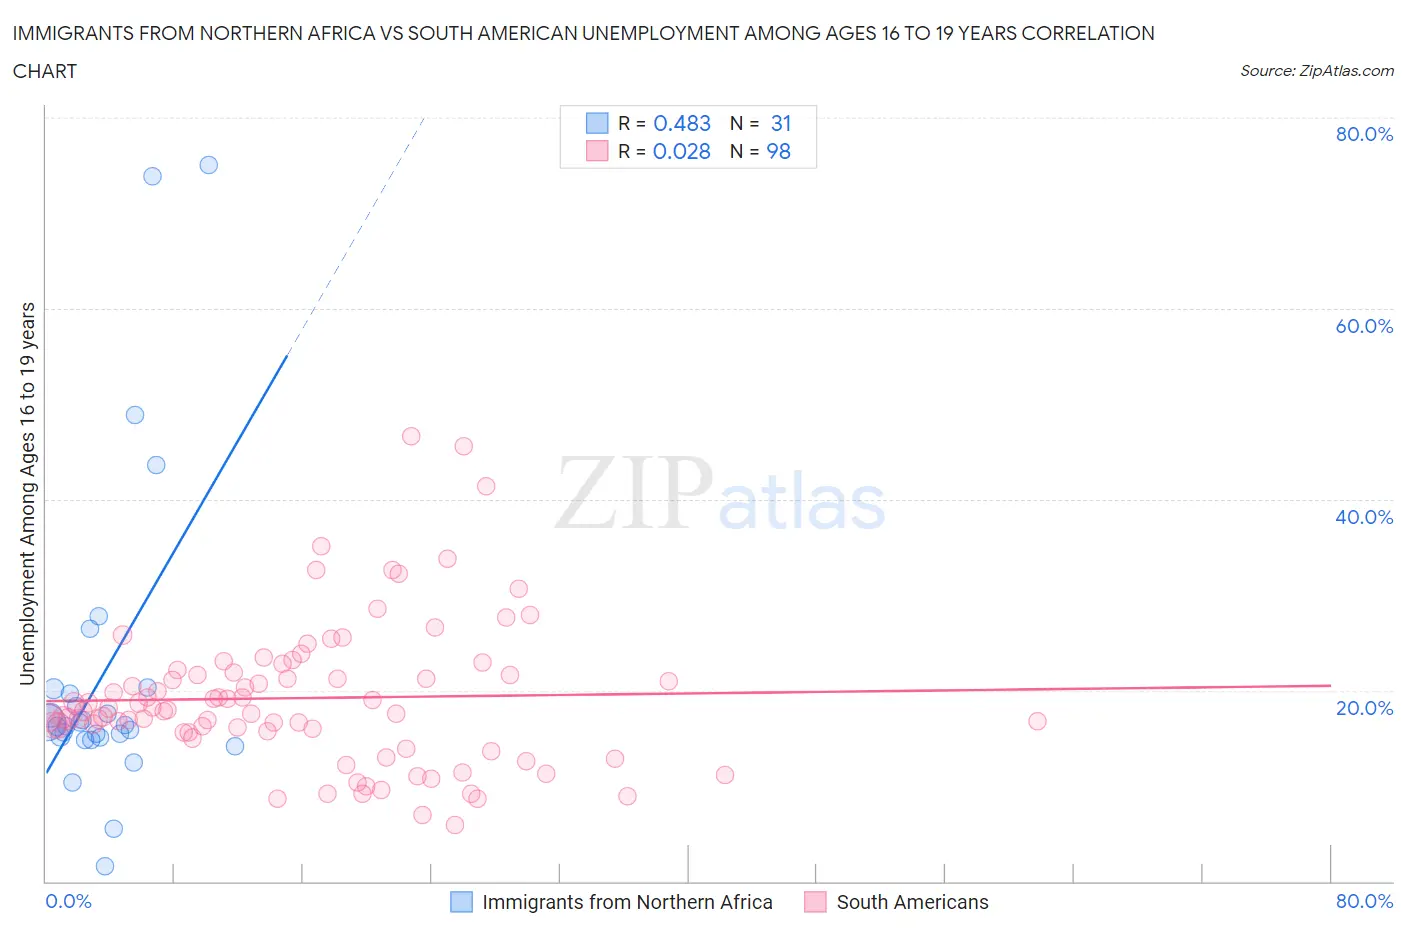 Immigrants from Northern Africa vs South American Unemployment Among Ages 16 to 19 years